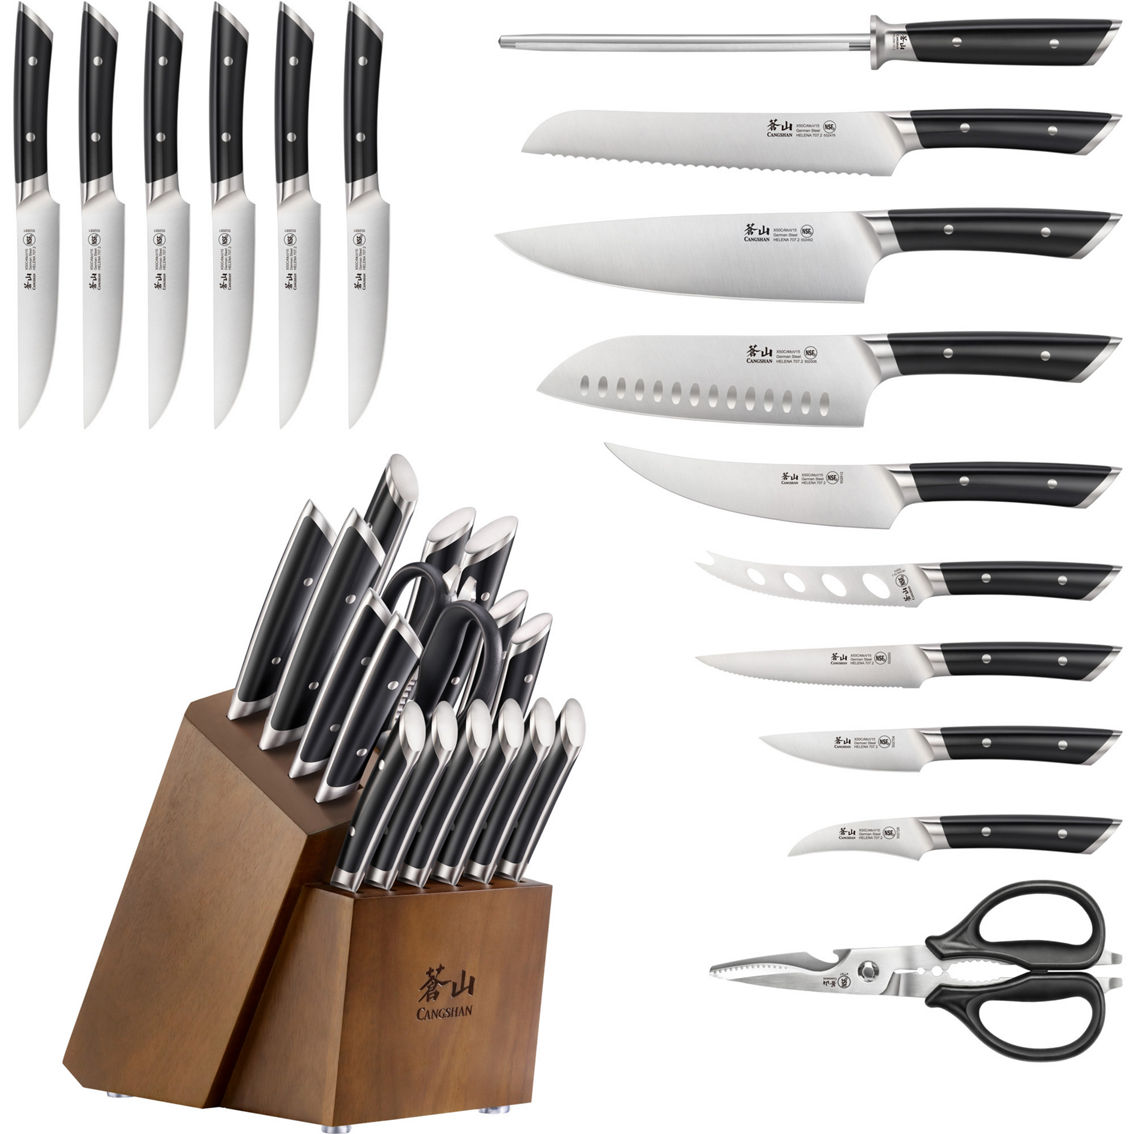 Cangshan Cutlery Helena Series Black 17 pc. Forged Knife Block Set - Image 2 of 6